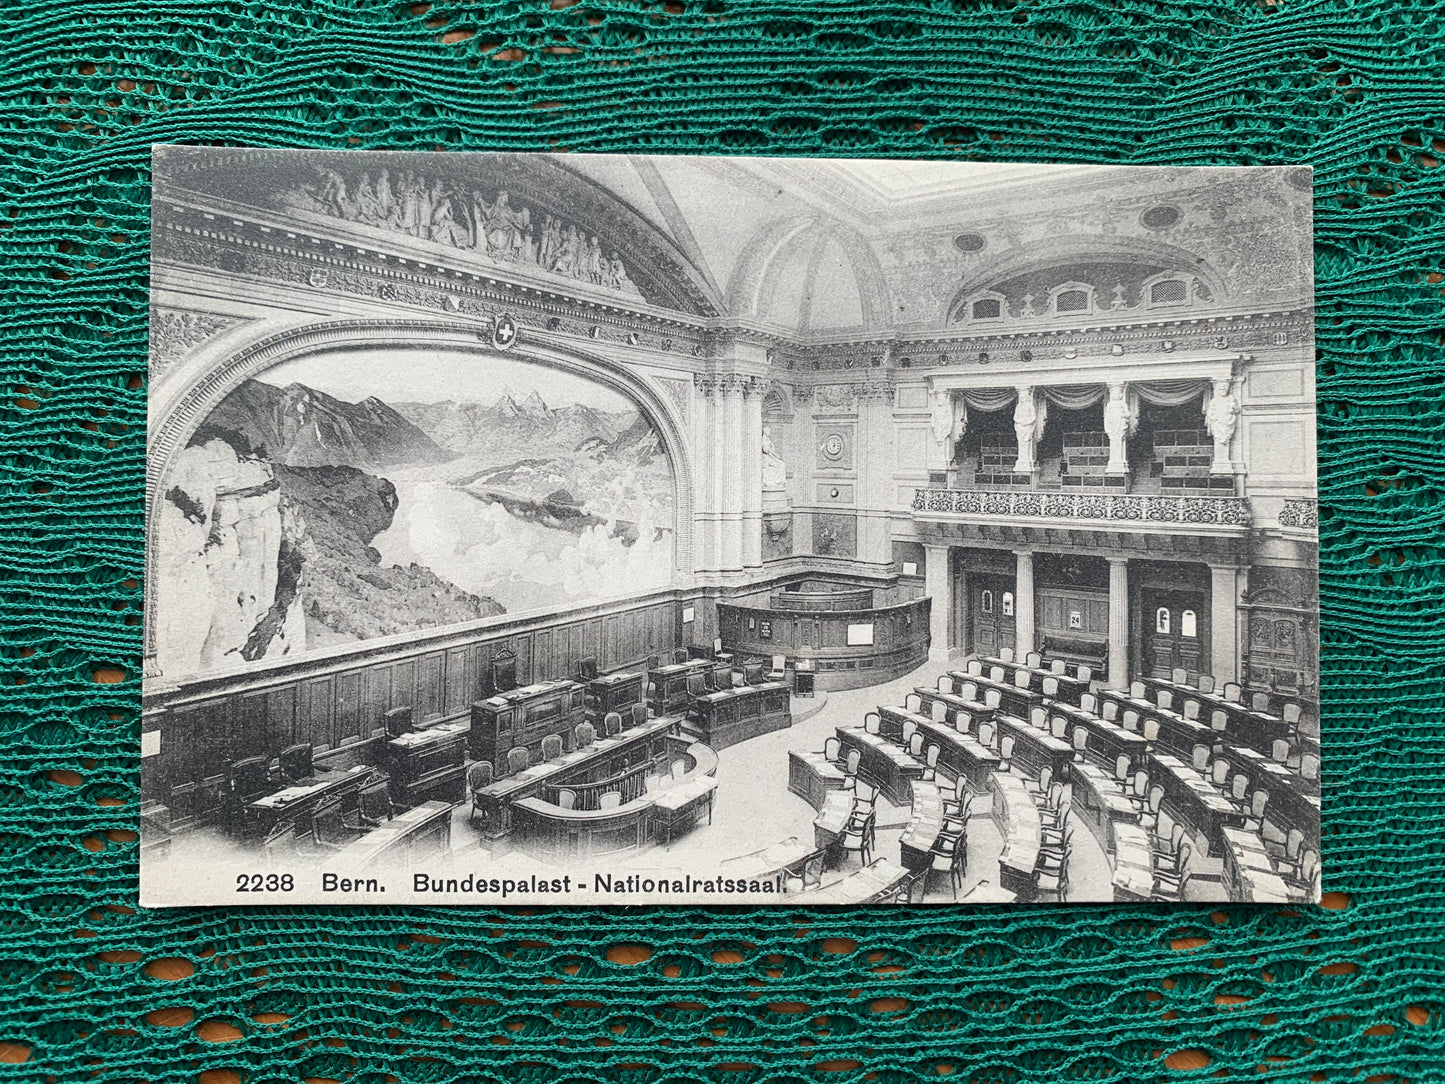 Old postcard - Antique postcard - Bern Bundespalast Nationalratssaal - Bern Federal Palace - National Council Hall - early 1900s - Unused